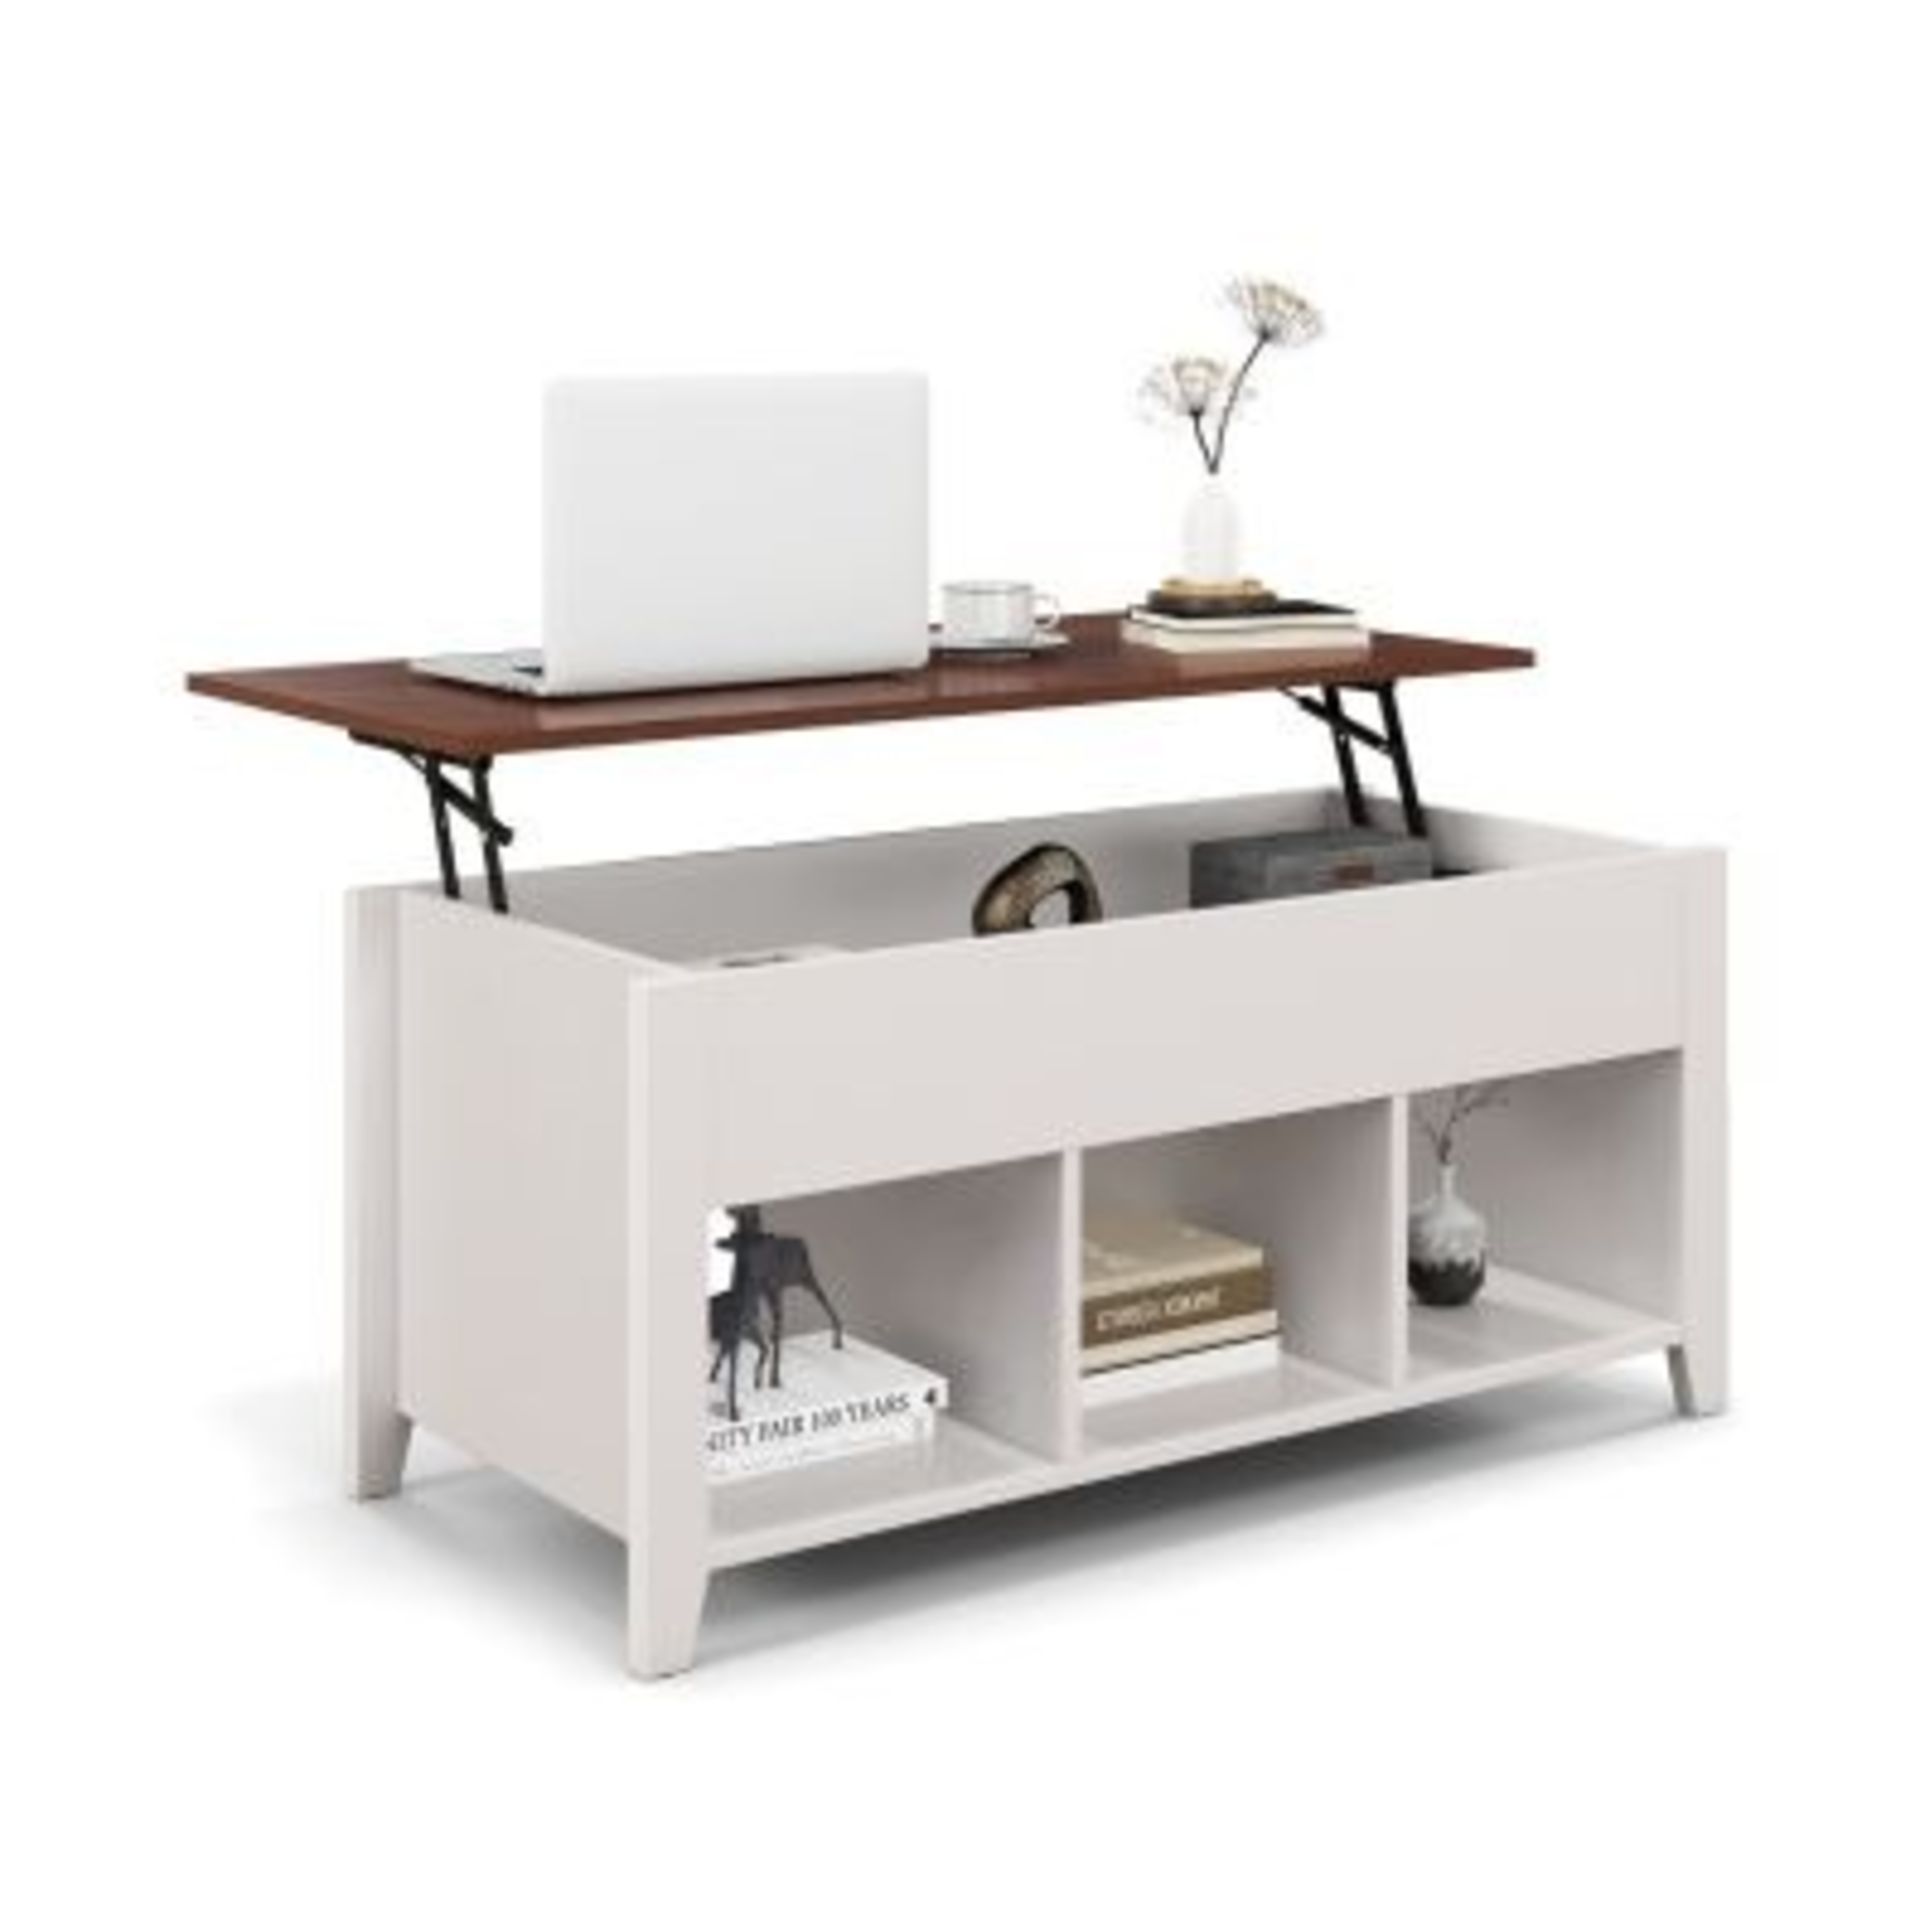 Rising Center Table with Lift Top Hidden Compartment - ER54